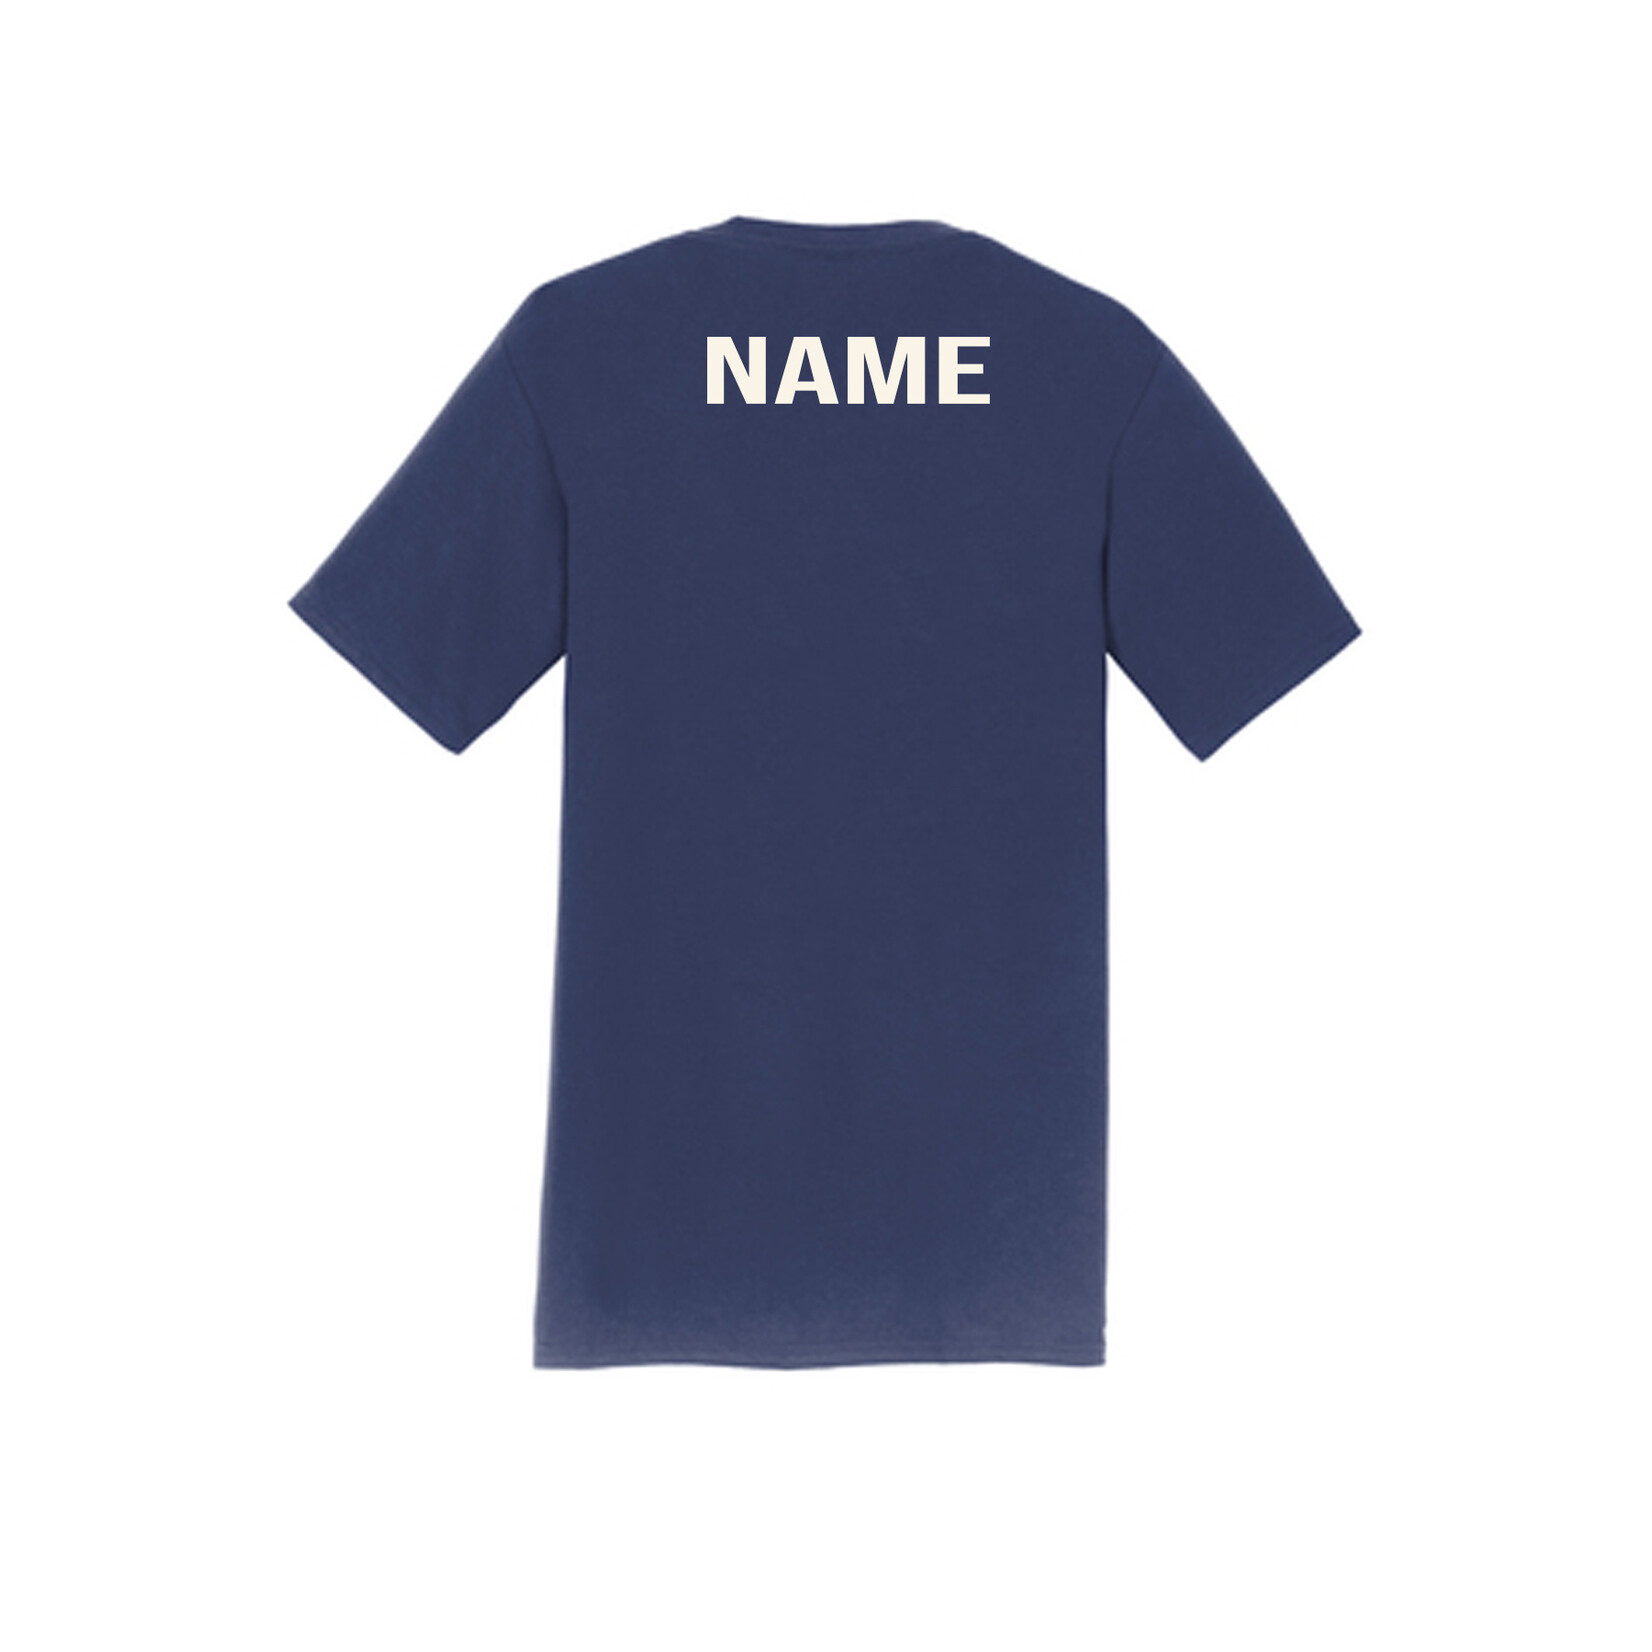 Add a Name to the back of my item